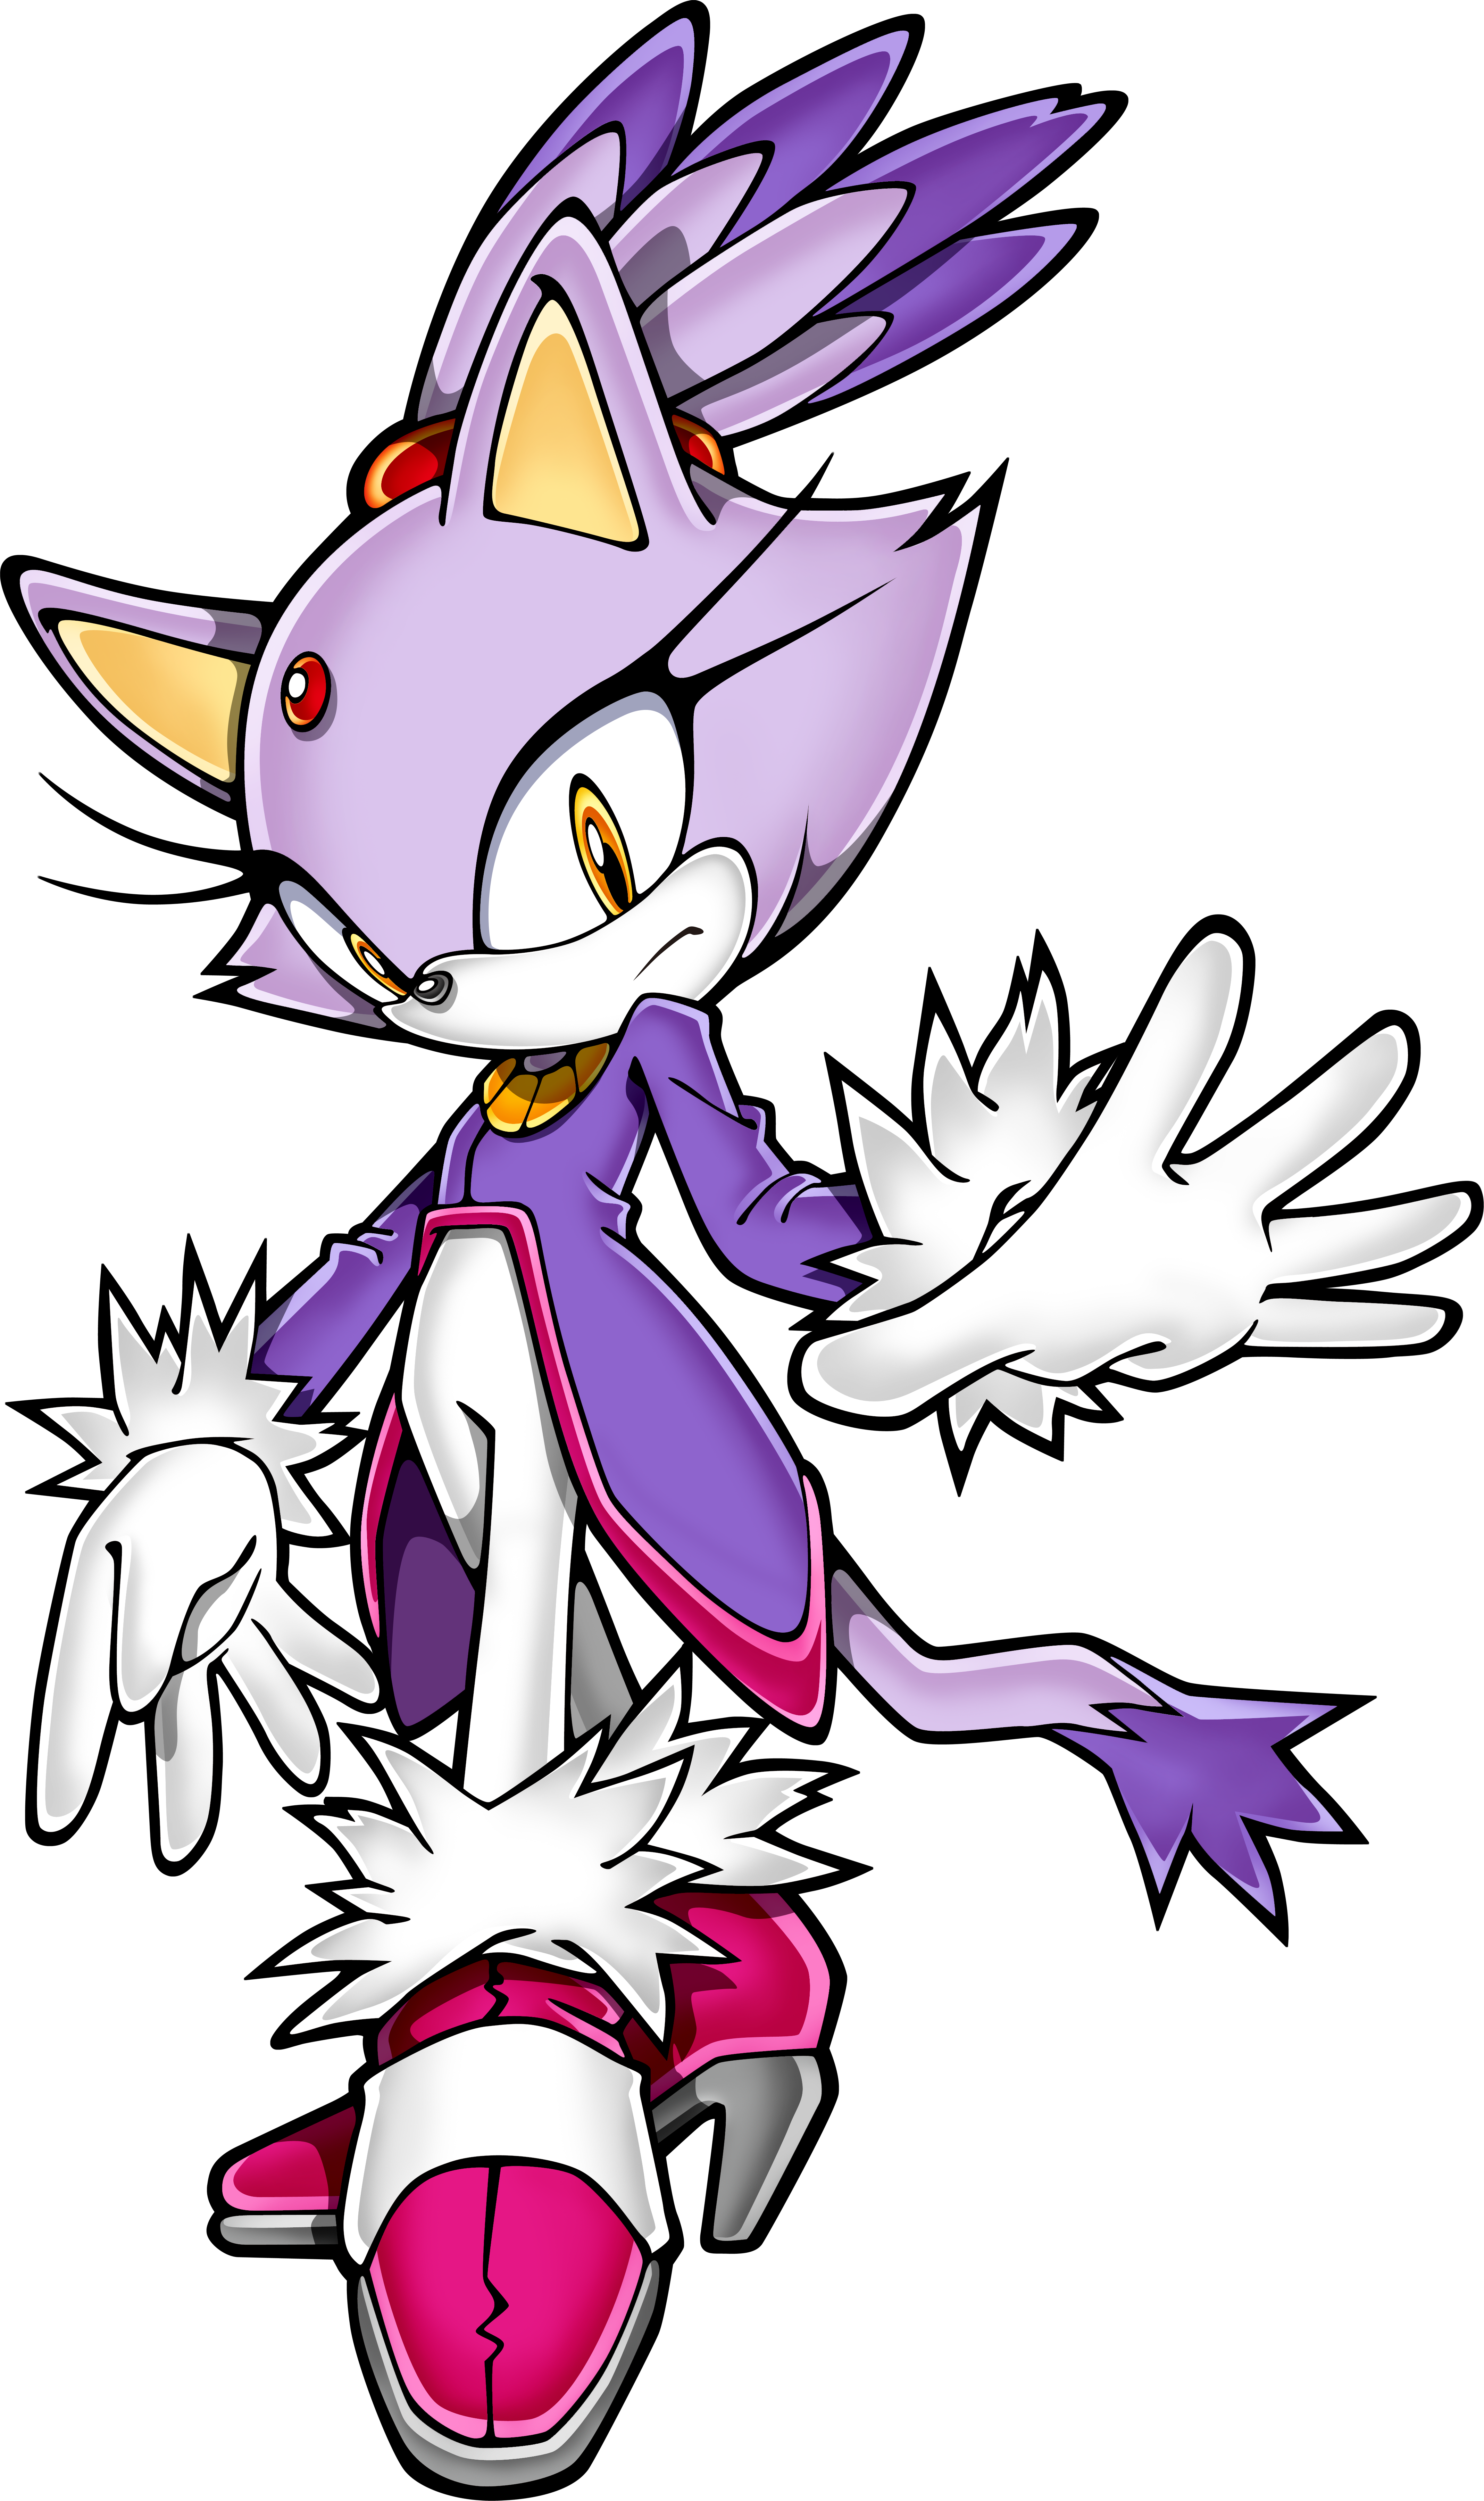 http://images3.wikia.nocookie.net/sonic/images/6/67/Sonicchannel_blaze.png